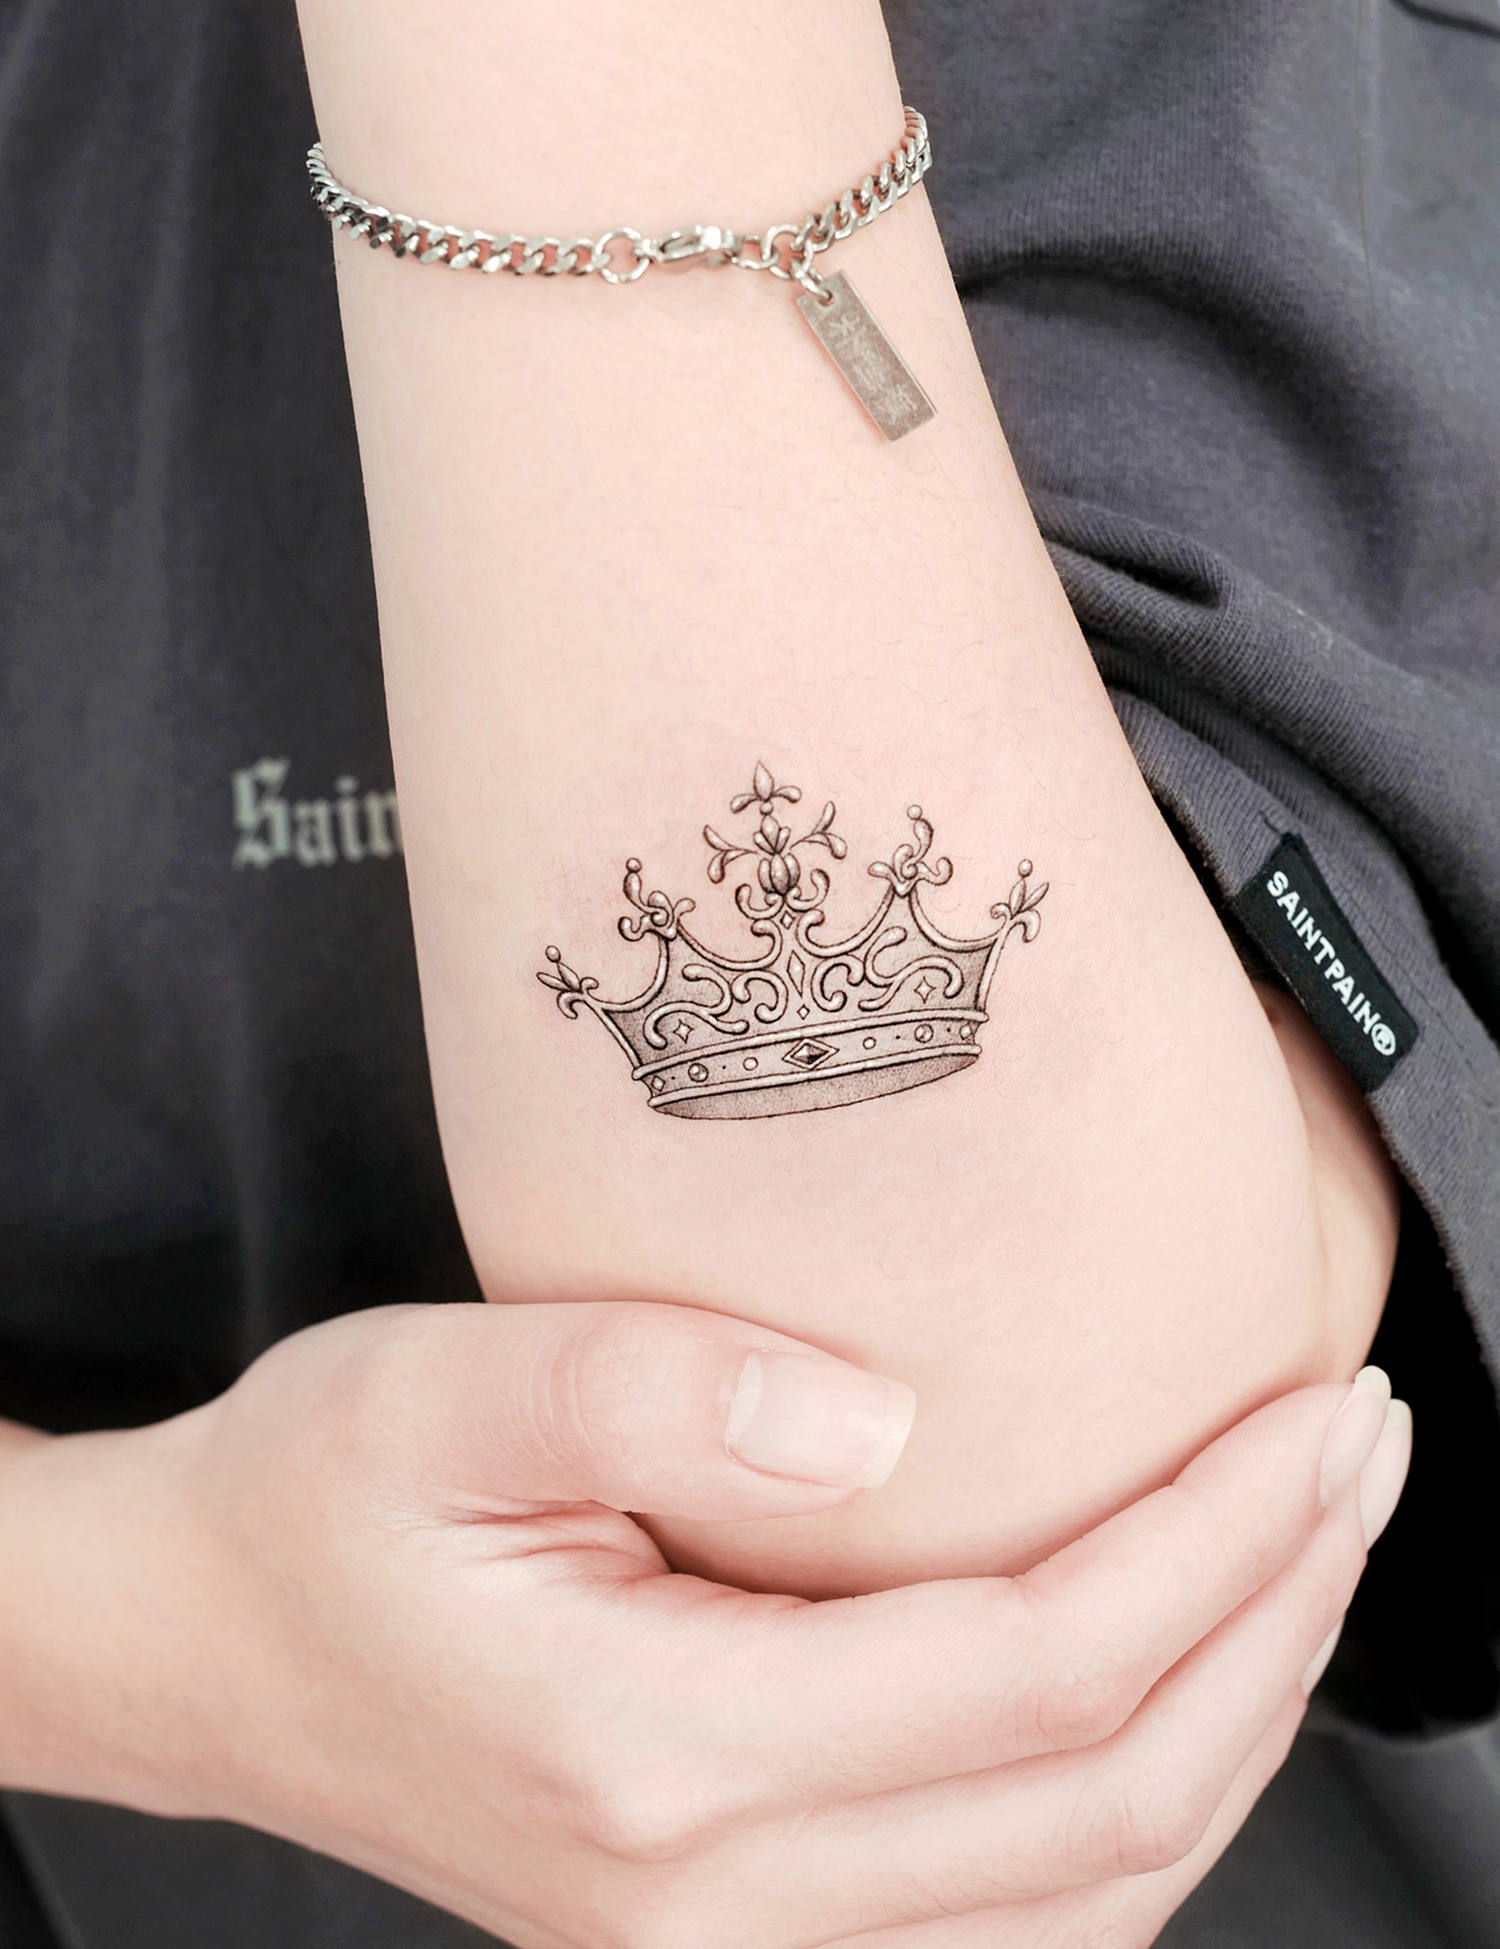 A tattoo resembling a 17th-century crown.